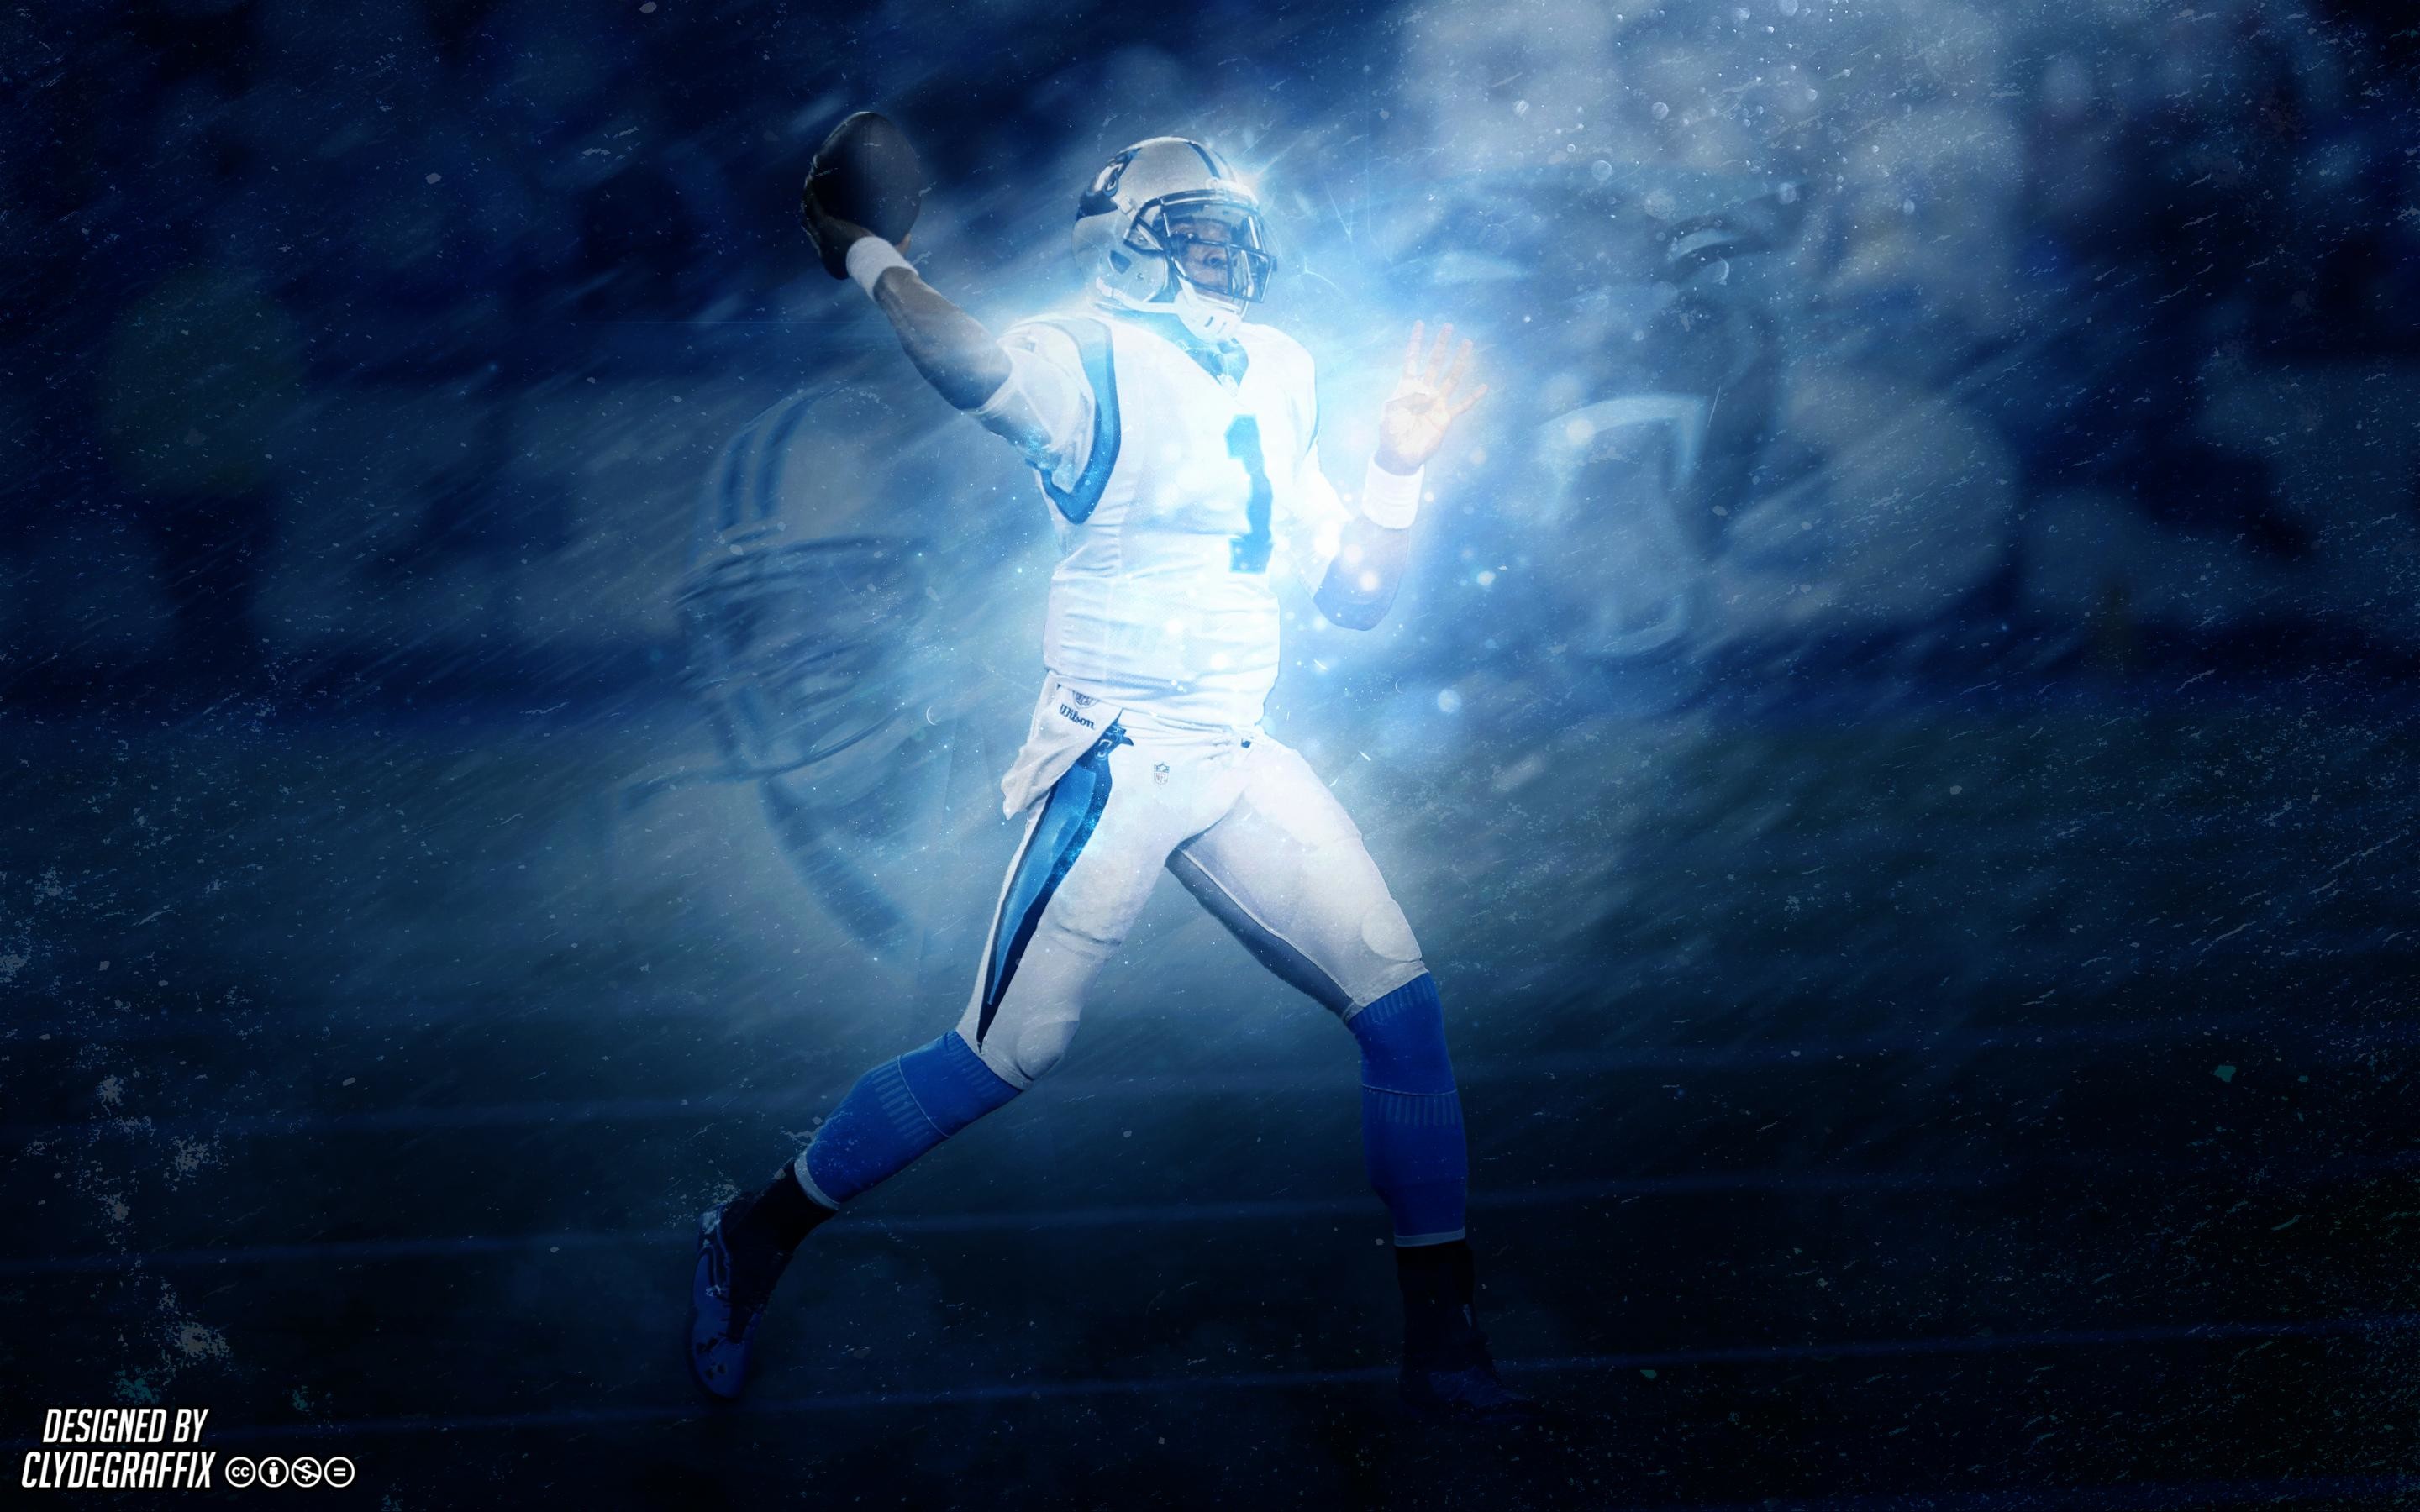 2880x1800 Made a Cam Newton wallpaper that I thout some of you might like!